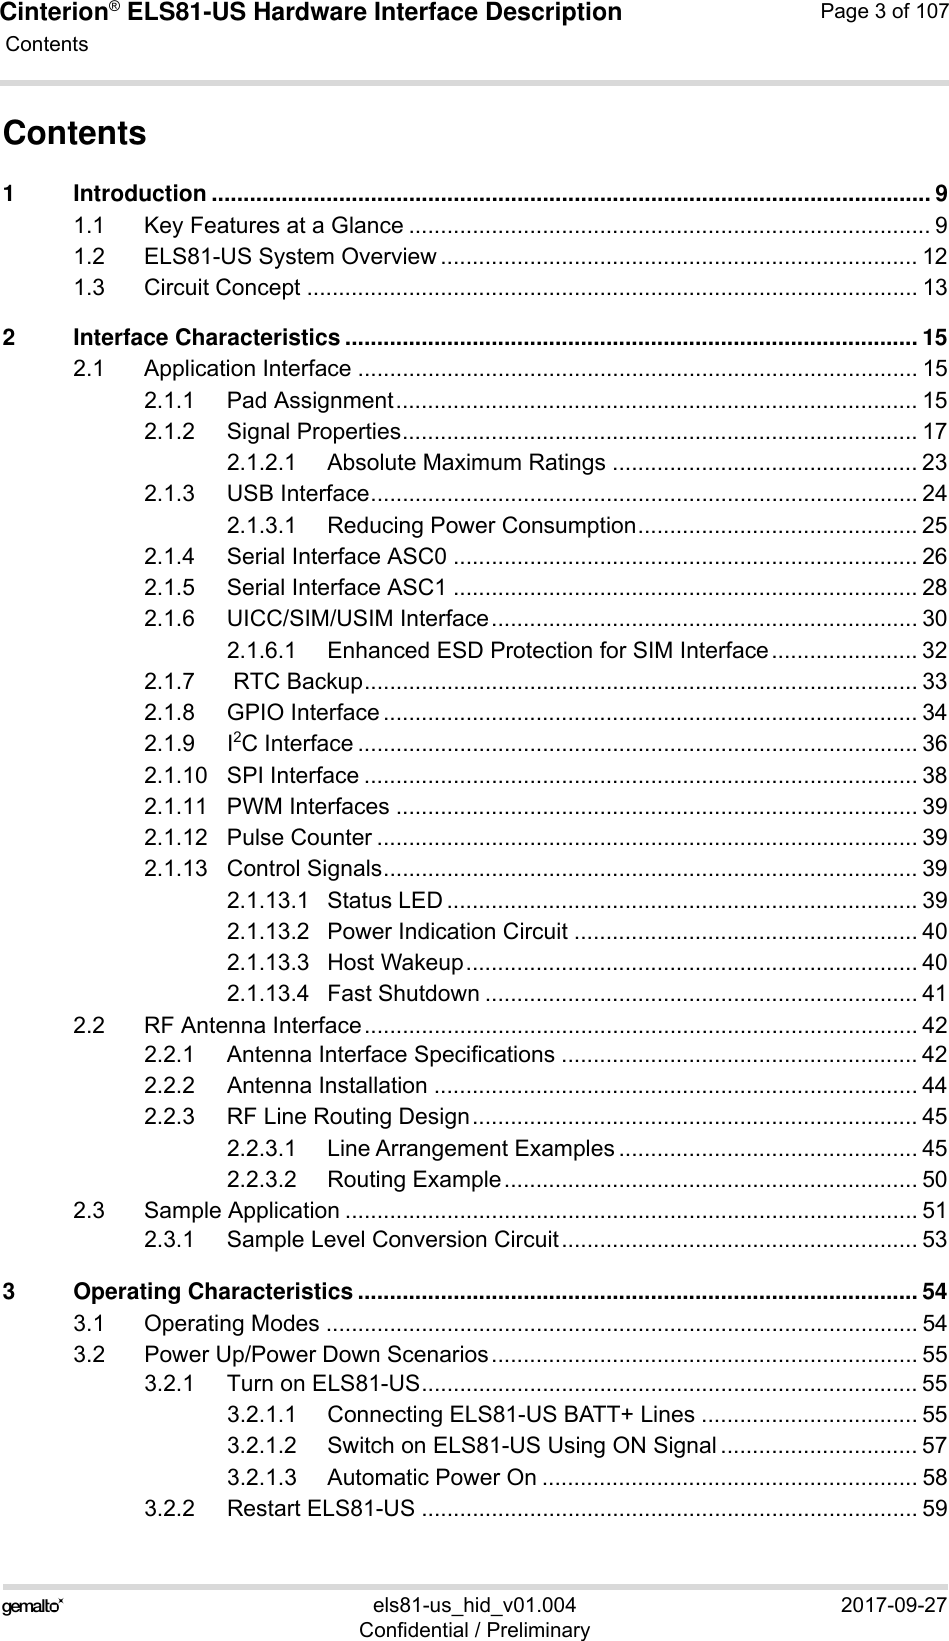 Cinterion® ELS81-US Hardware Interface Description Contents107els81-us_hid_v01.004 2017-09-27Confidential / PreliminaryPage 3 of 107Contents1 Introduction ................................................................................................................. 91.1 Key Features at a Glance .................................................................................. 91.2 ELS81-US System Overview ........................................................................... 121.3 Circuit Concept ................................................................................................ 132 Interface Characteristics .......................................................................................... 152.1 Application Interface ........................................................................................ 152.1.1 Pad Assignment.................................................................................. 152.1.2 Signal Properties................................................................................. 172.1.2.1 Absolute Maximum Ratings ................................................ 232.1.3 USB Interface...................................................................................... 242.1.3.1 Reducing Power Consumption............................................ 252.1.4 Serial Interface ASC0 ......................................................................... 262.1.5 Serial Interface ASC1 ......................................................................... 282.1.6 UICC/SIM/USIM Interface................................................................... 302.1.6.1 Enhanced ESD Protection for SIM Interface....................... 322.1.7  RTC Backup....................................................................................... 332.1.8 GPIO Interface .................................................................................... 342.1.9 I2C Interface ........................................................................................ 362.1.10 SPI Interface ....................................................................................... 382.1.11 PWM Interfaces .................................................................................. 392.1.12 Pulse Counter ..................................................................................... 392.1.13 Control Signals.................................................................................... 392.1.13.1 Status LED .......................................................................... 392.1.13.2 Power Indication Circuit ...................................................... 402.1.13.3 Host Wakeup....................................................................... 402.1.13.4 Fast Shutdown .................................................................... 412.2 RF Antenna Interface....................................................................................... 422.2.1 Antenna Interface Specifications ........................................................ 422.2.2 Antenna Installation ............................................................................ 442.2.3 RF Line Routing Design...................................................................... 452.2.3.1 Line Arrangement Examples ............................................... 452.2.3.2 Routing Example................................................................. 502.3 Sample Application .......................................................................................... 512.3.1 Sample Level Conversion Circuit........................................................ 533 Operating Characteristics ........................................................................................ 543.1 Operating Modes ............................................................................................. 543.2 Power Up/Power Down Scenarios................................................................... 553.2.1 Turn on ELS81-US.............................................................................. 553.2.1.1 Connecting ELS81-US BATT+ Lines .................................. 553.2.1.2 Switch on ELS81-US Using ON Signal ............................... 573.2.1.3 Automatic Power On ........................................................... 583.2.2 Restart ELS81-US .............................................................................. 59